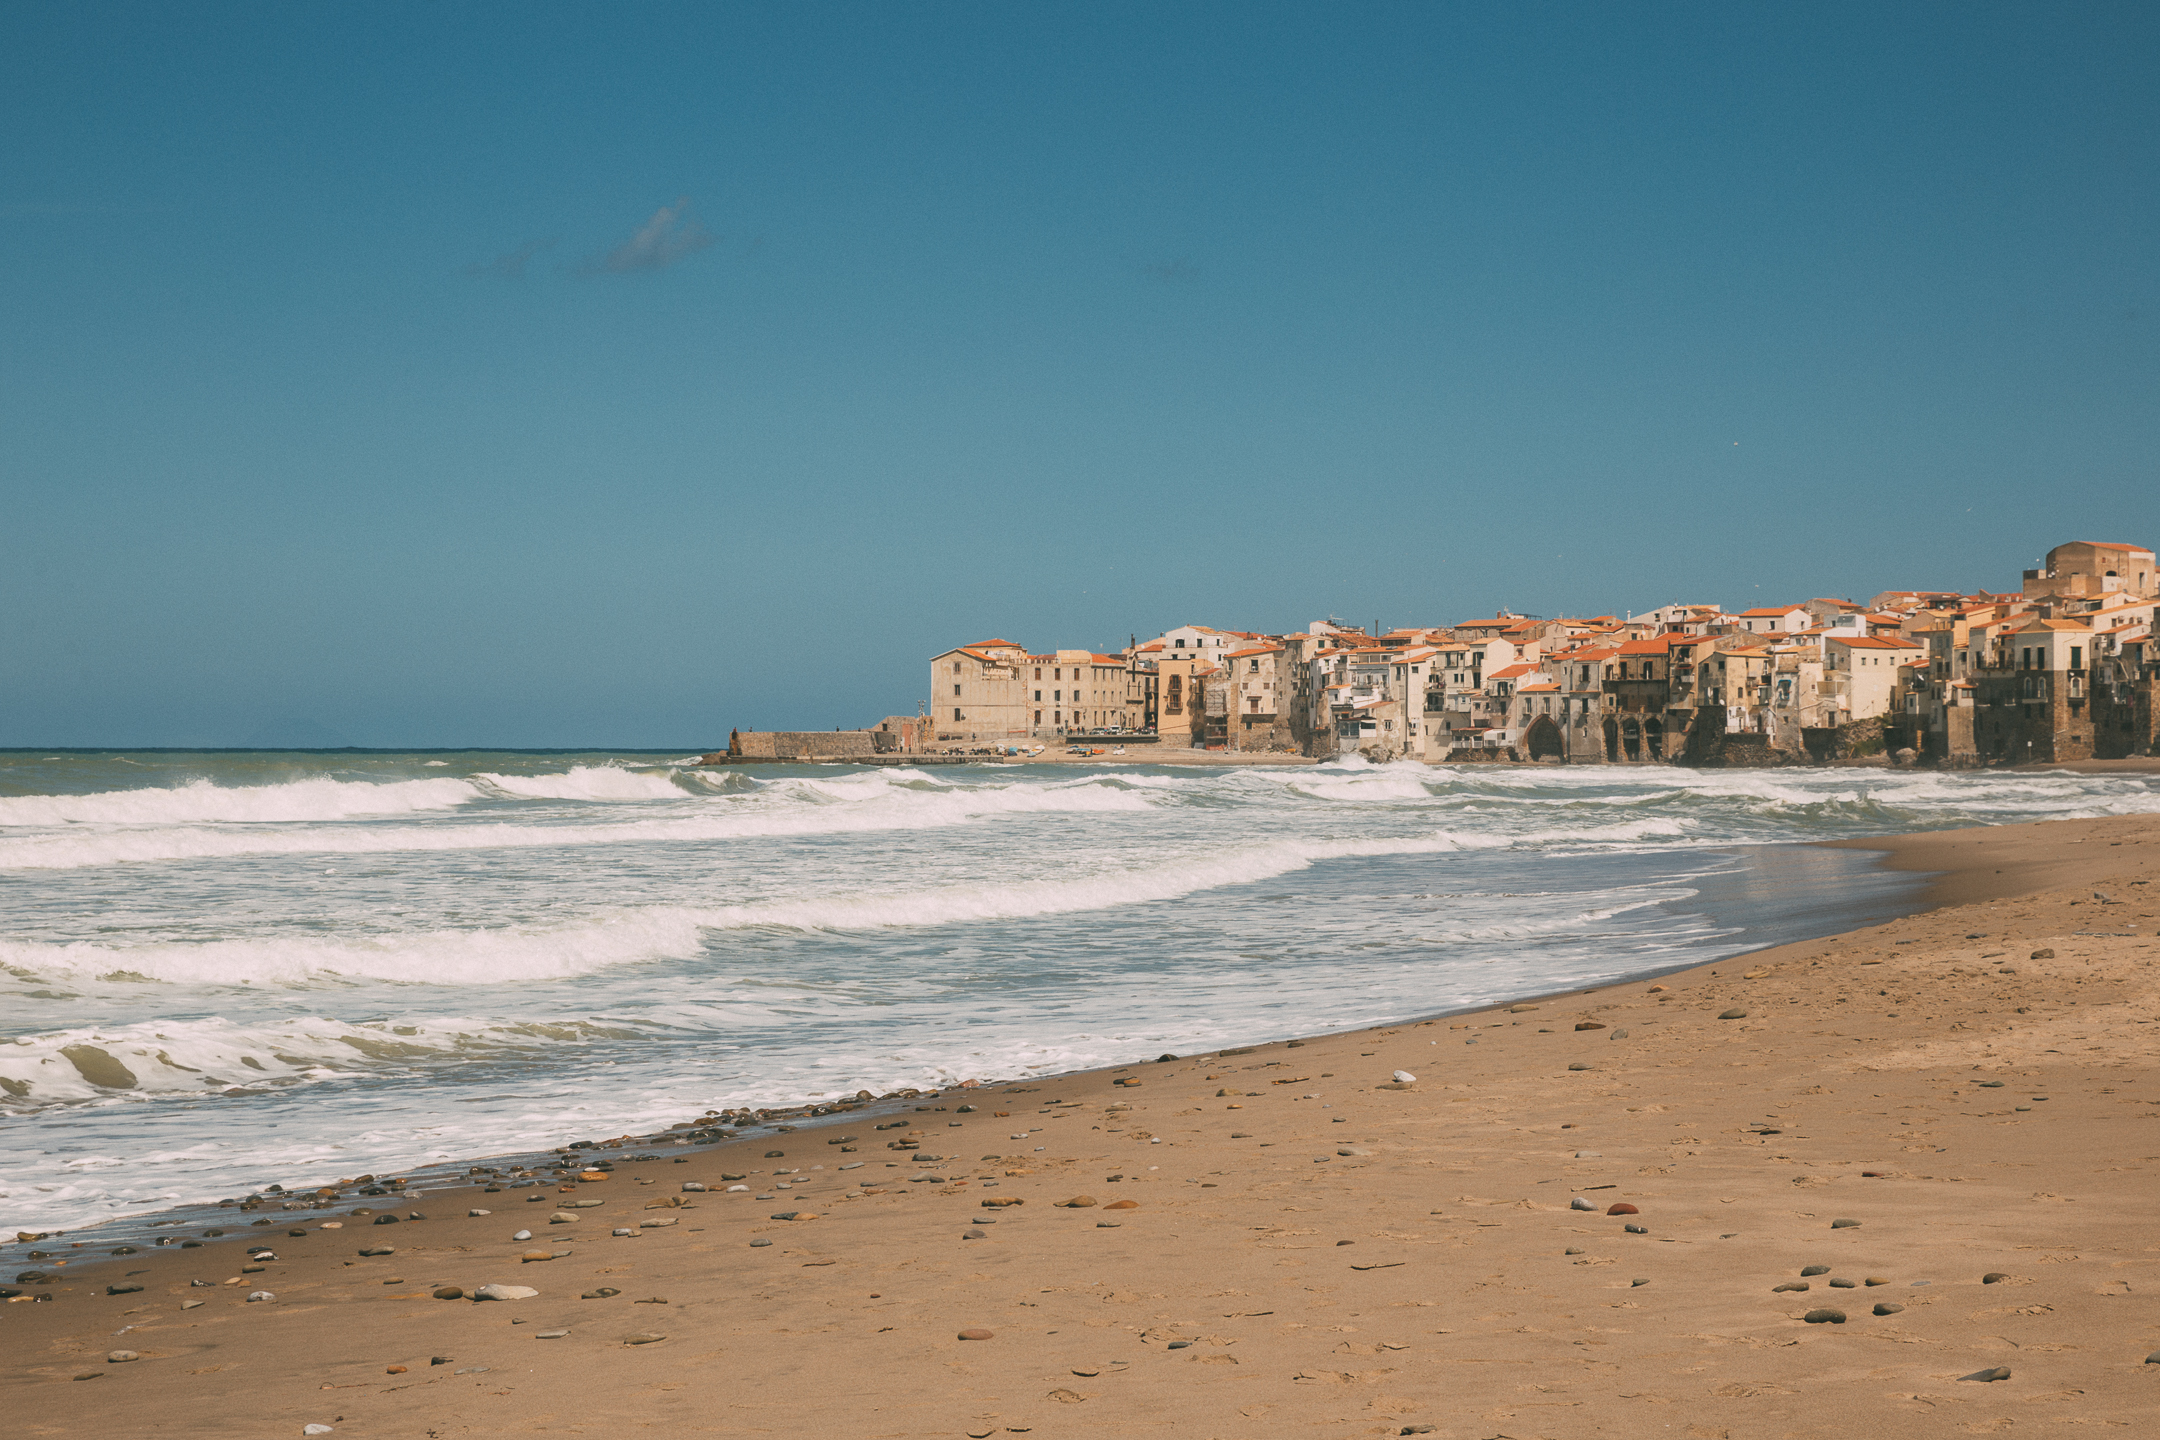 3 days in Cefalù: what to see, do and eat